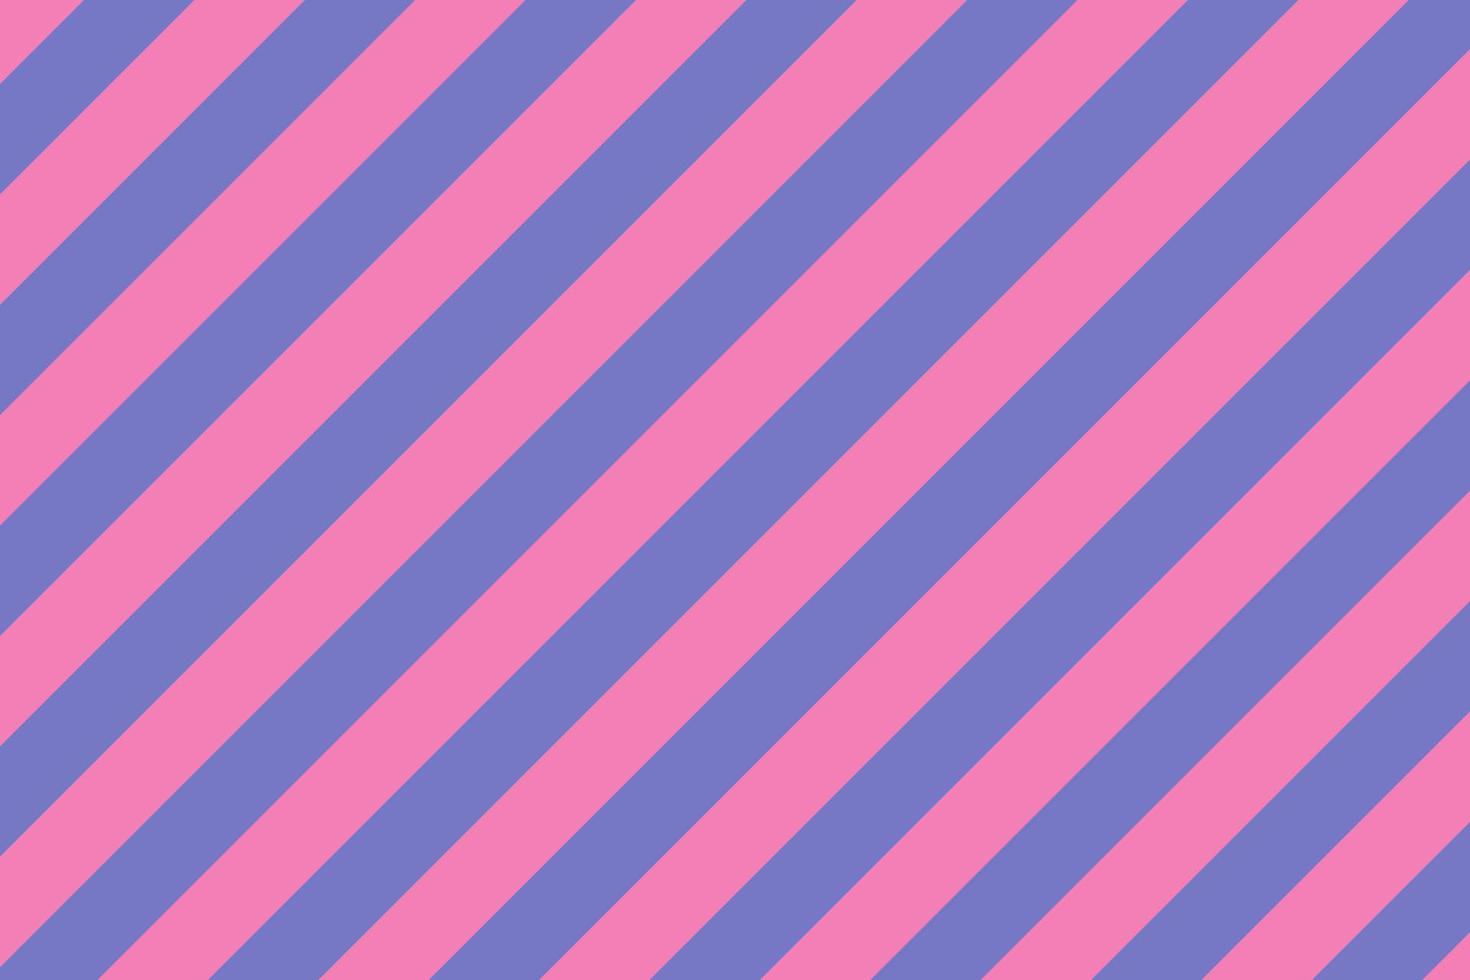 Diagonal stripes pattern. Abstract background. Vector illustration.